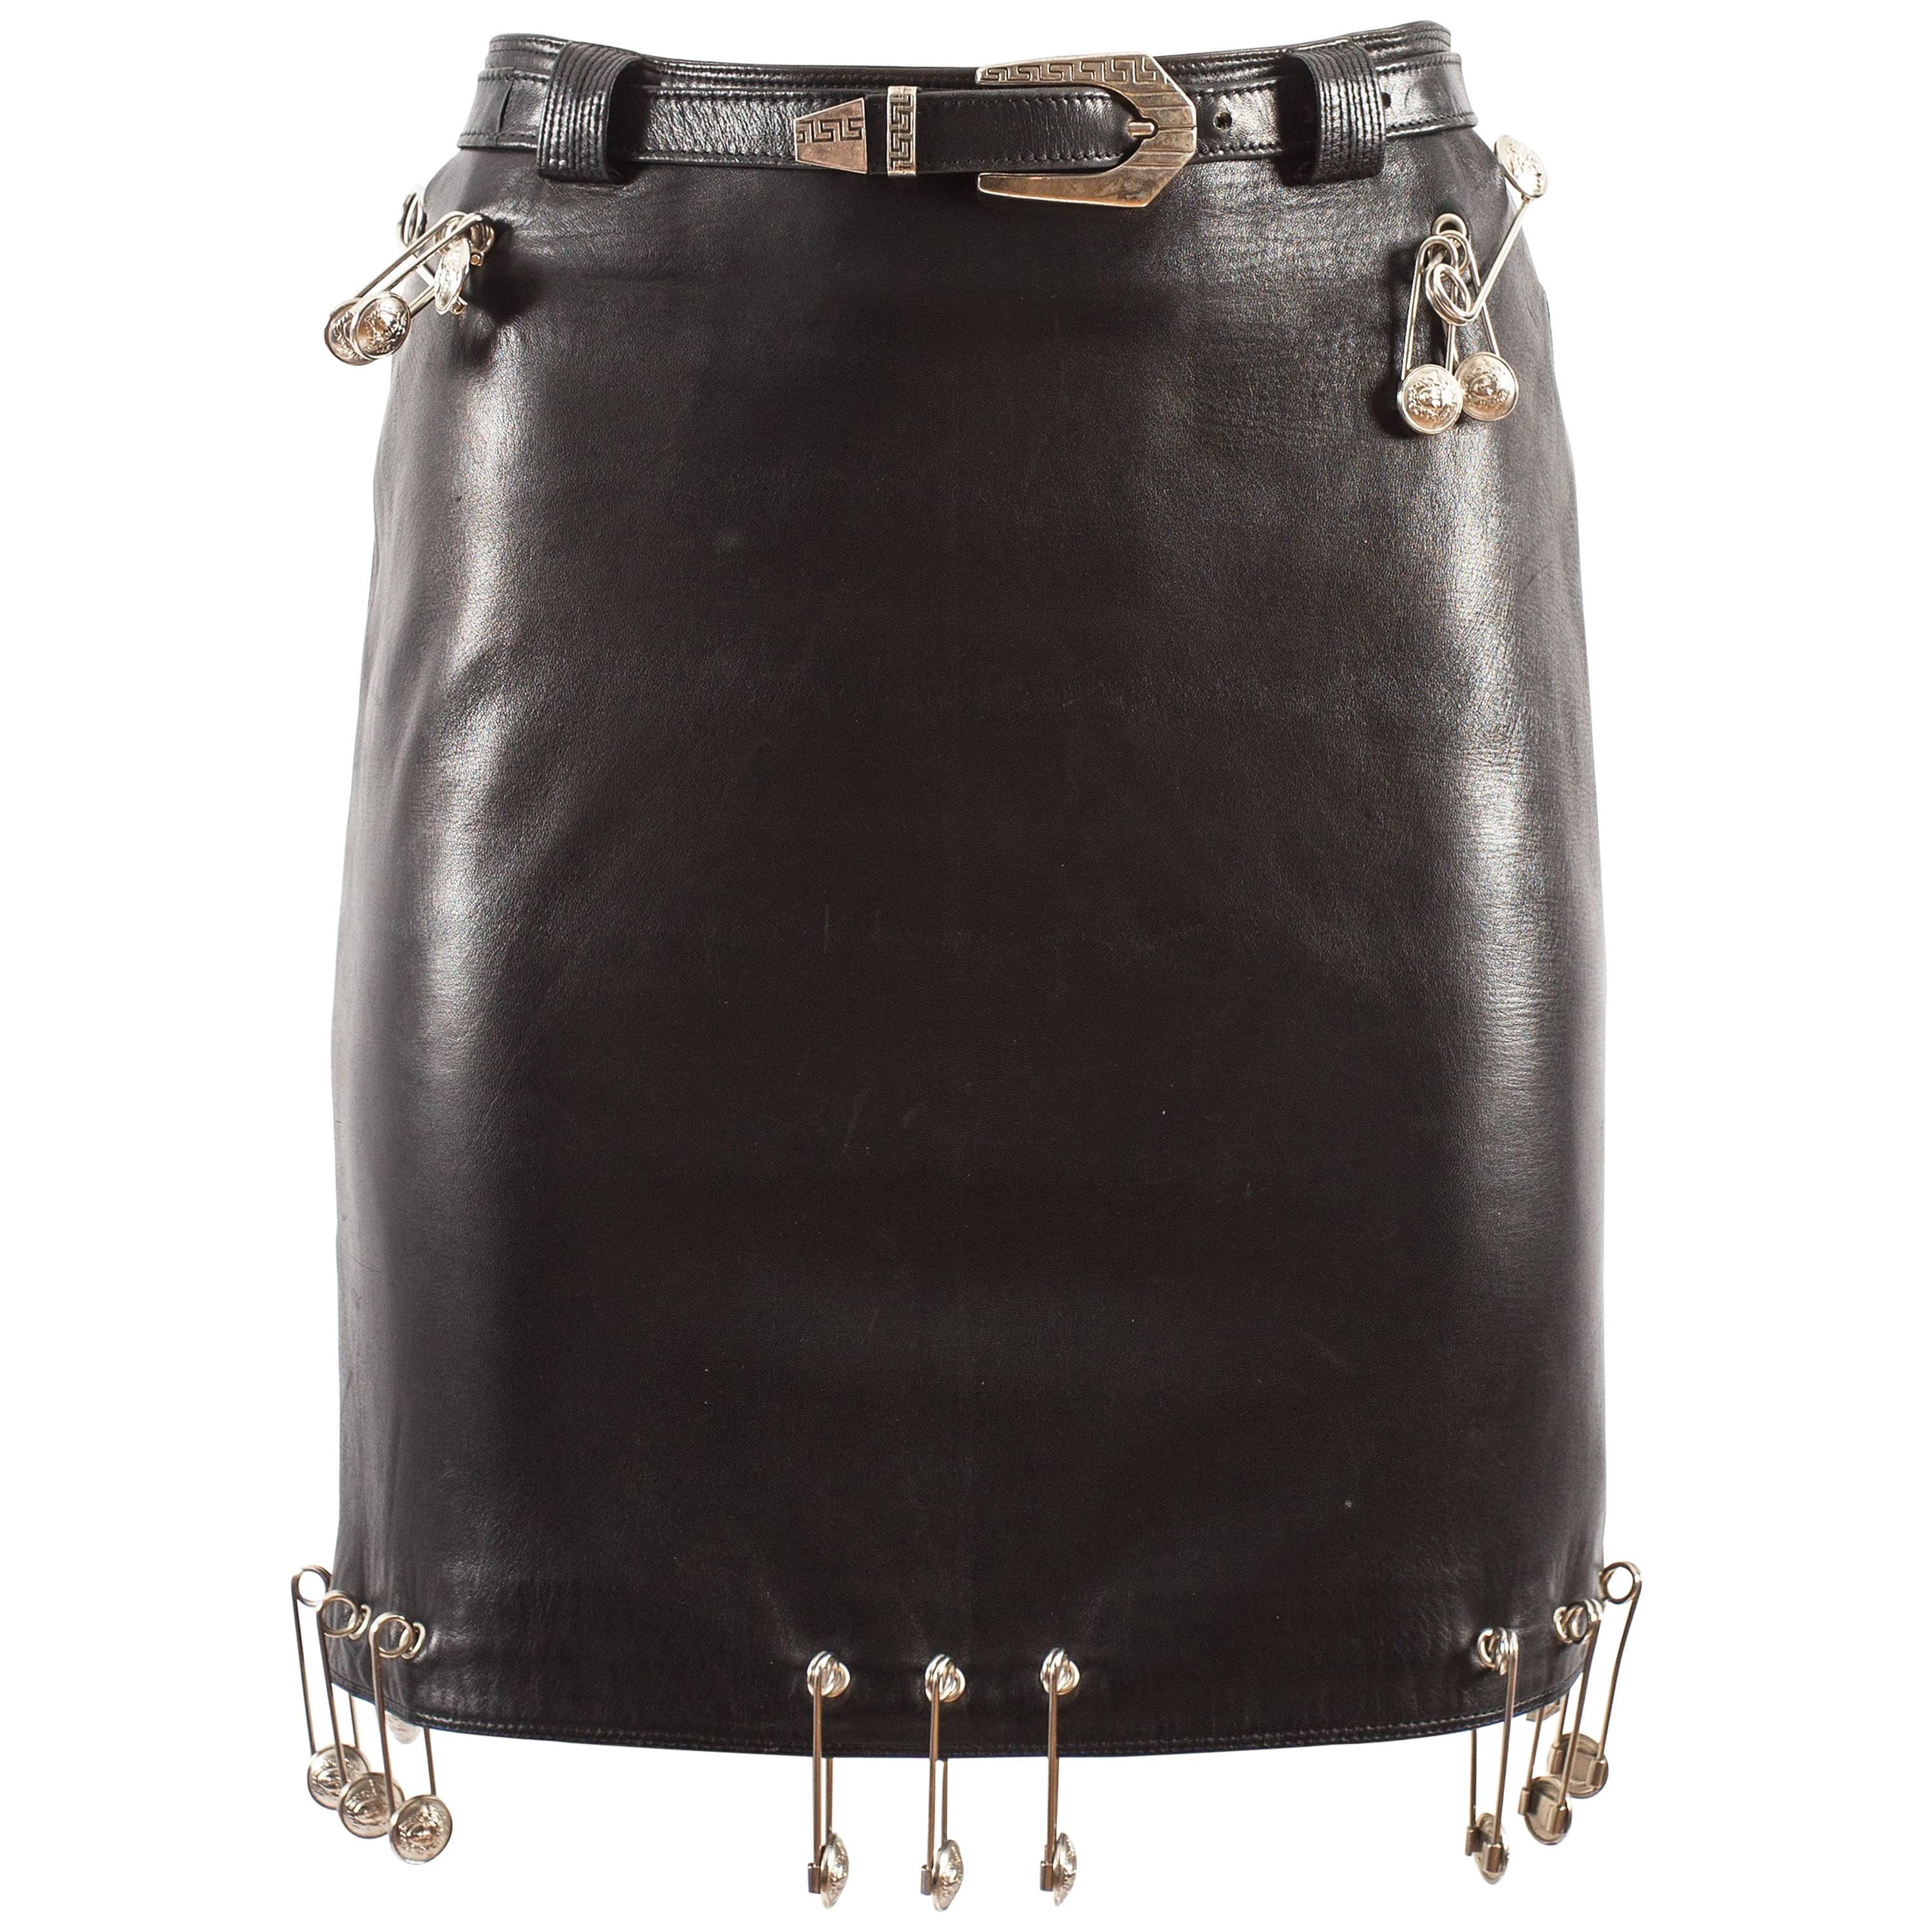 Gianni Versace Spring-Summer 1994 black lambskin leather skirt with safety pins